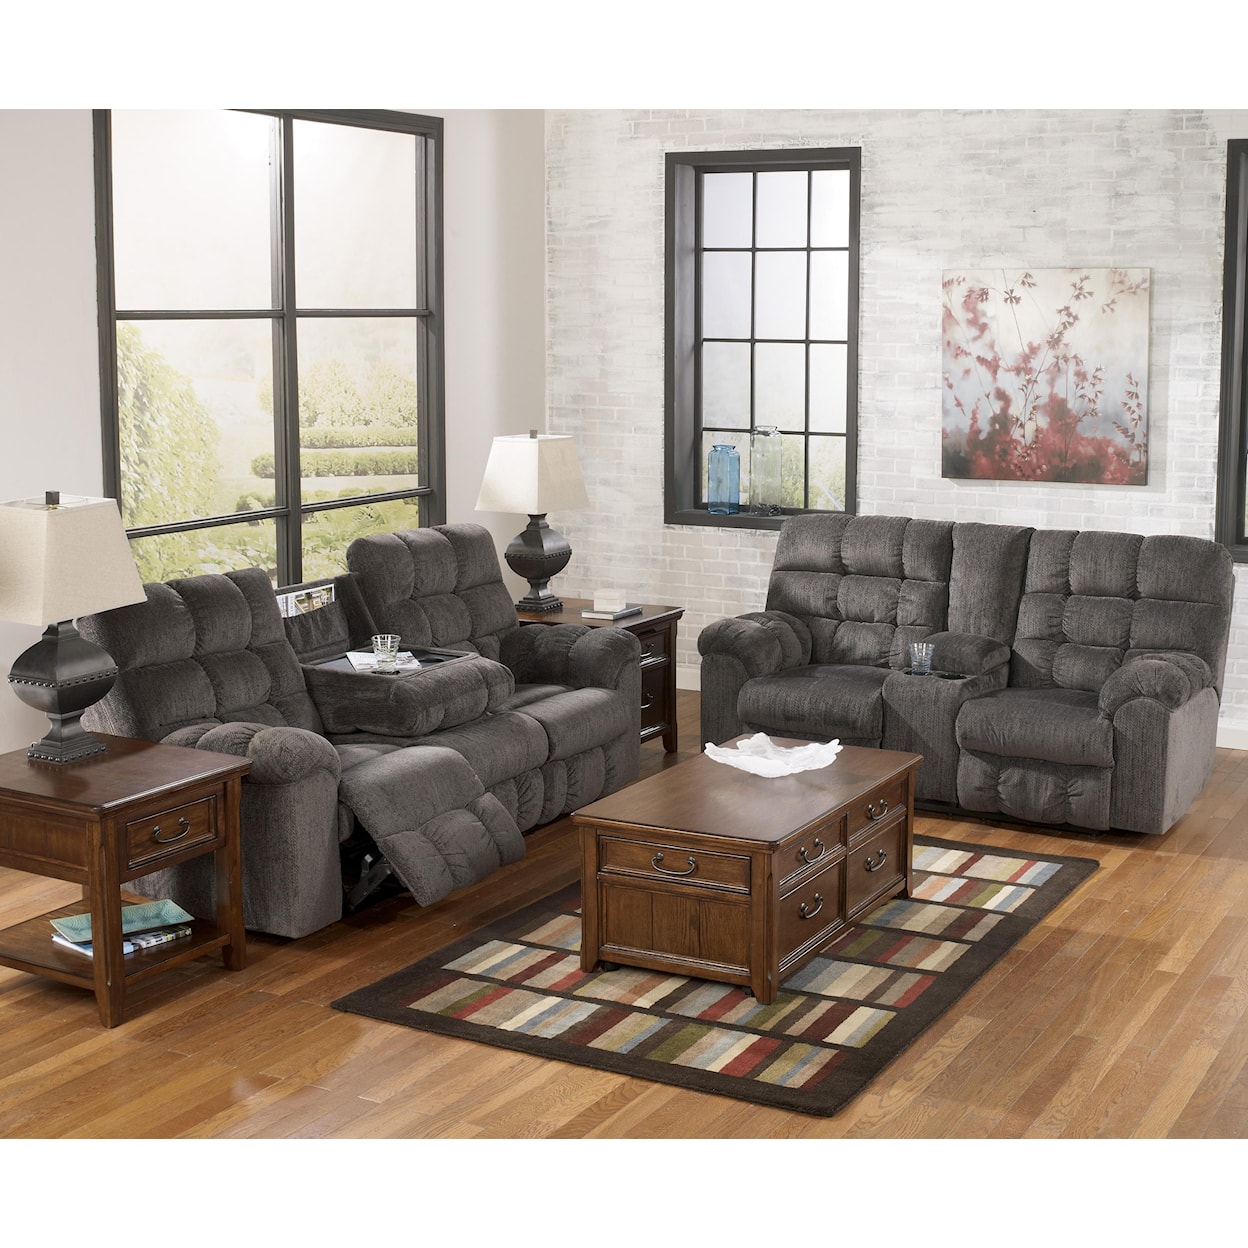 Signature Design by Ashley Acieona Reclining Sofa with Drop Down Table